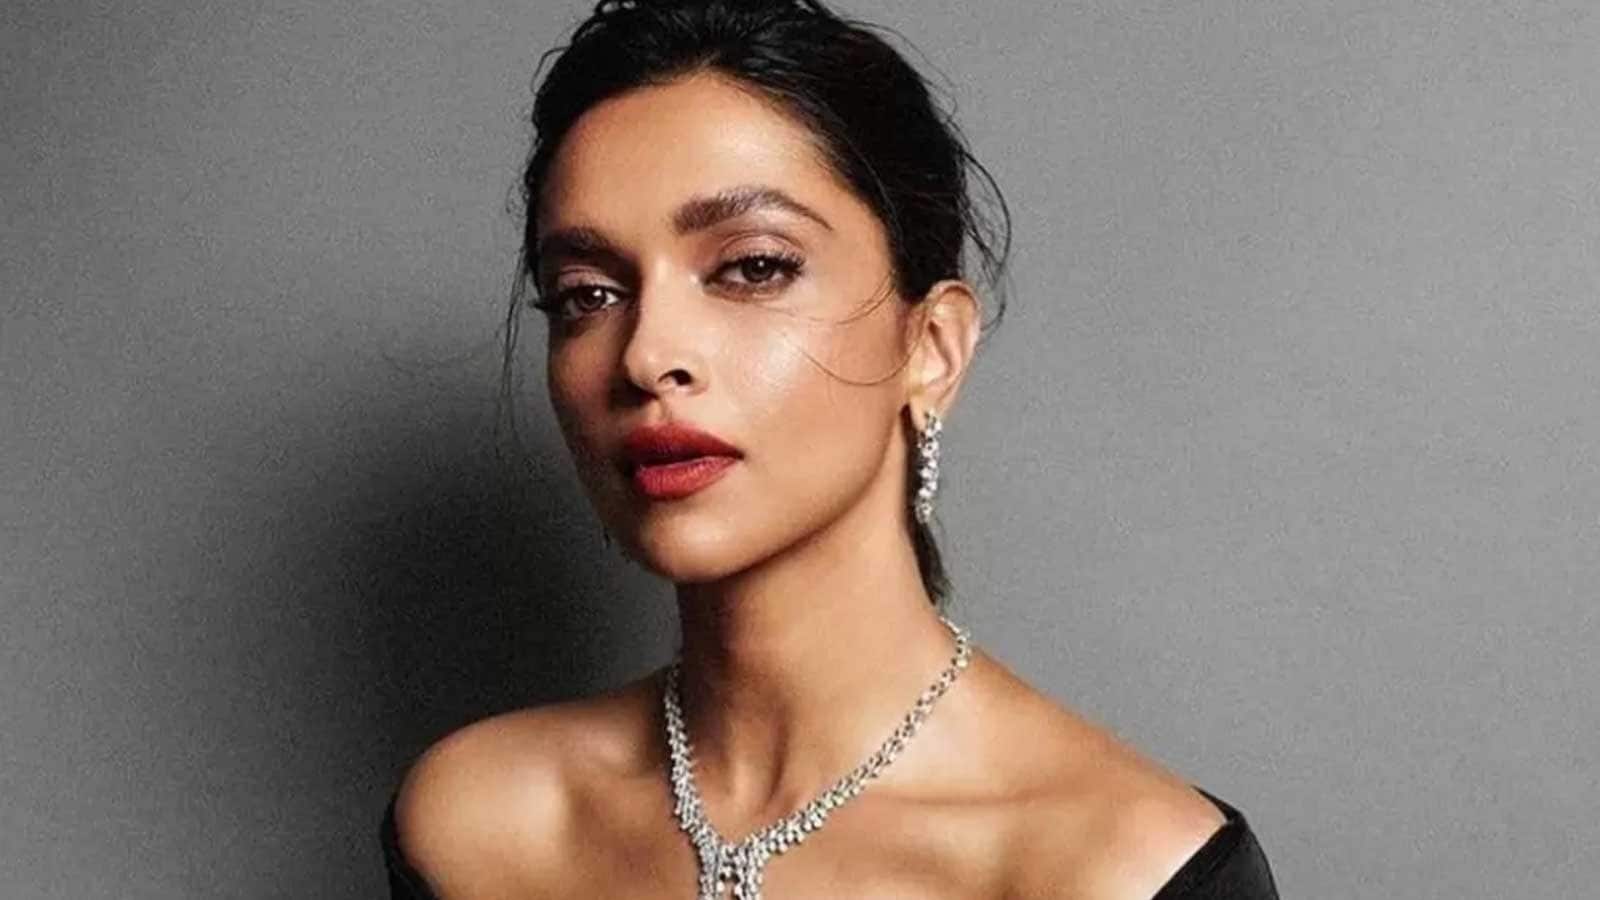 All About Deepika Padukone’s Fitness Routine And Healthy Diet Plan